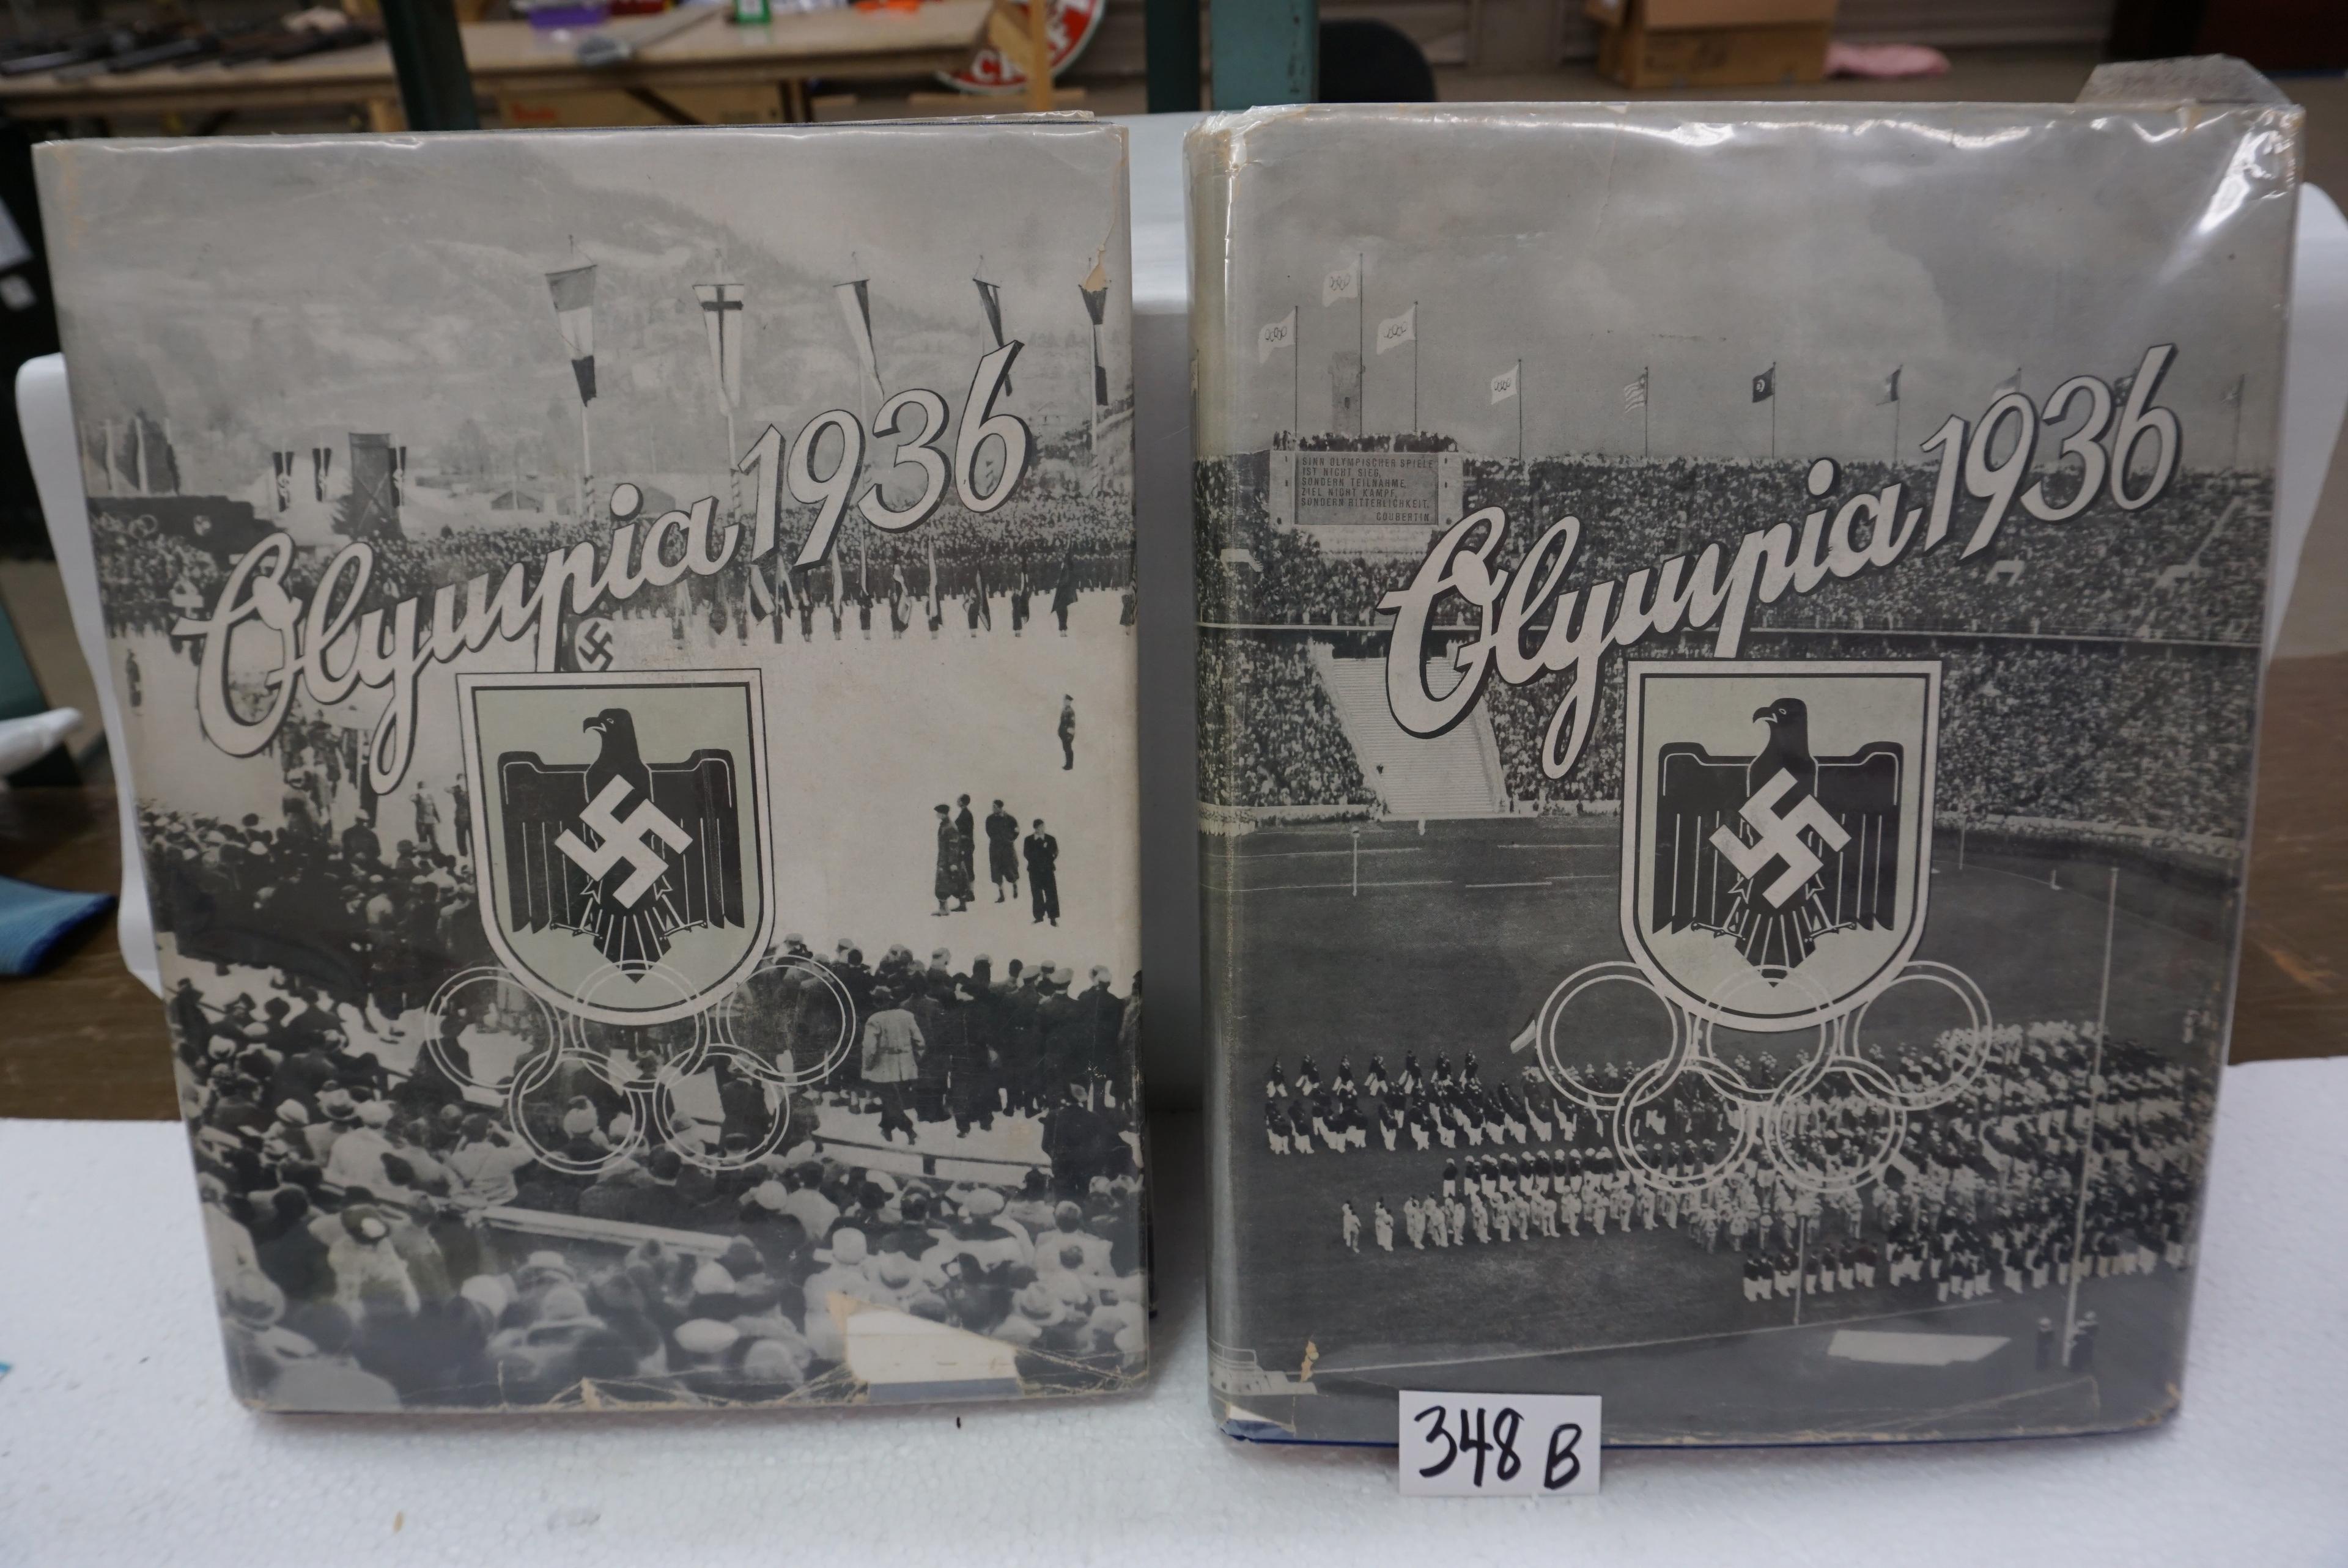 NAZI Olympics 1936, Volume 1 and Volume 2, both one money, with dust jackets. complete. awesome find